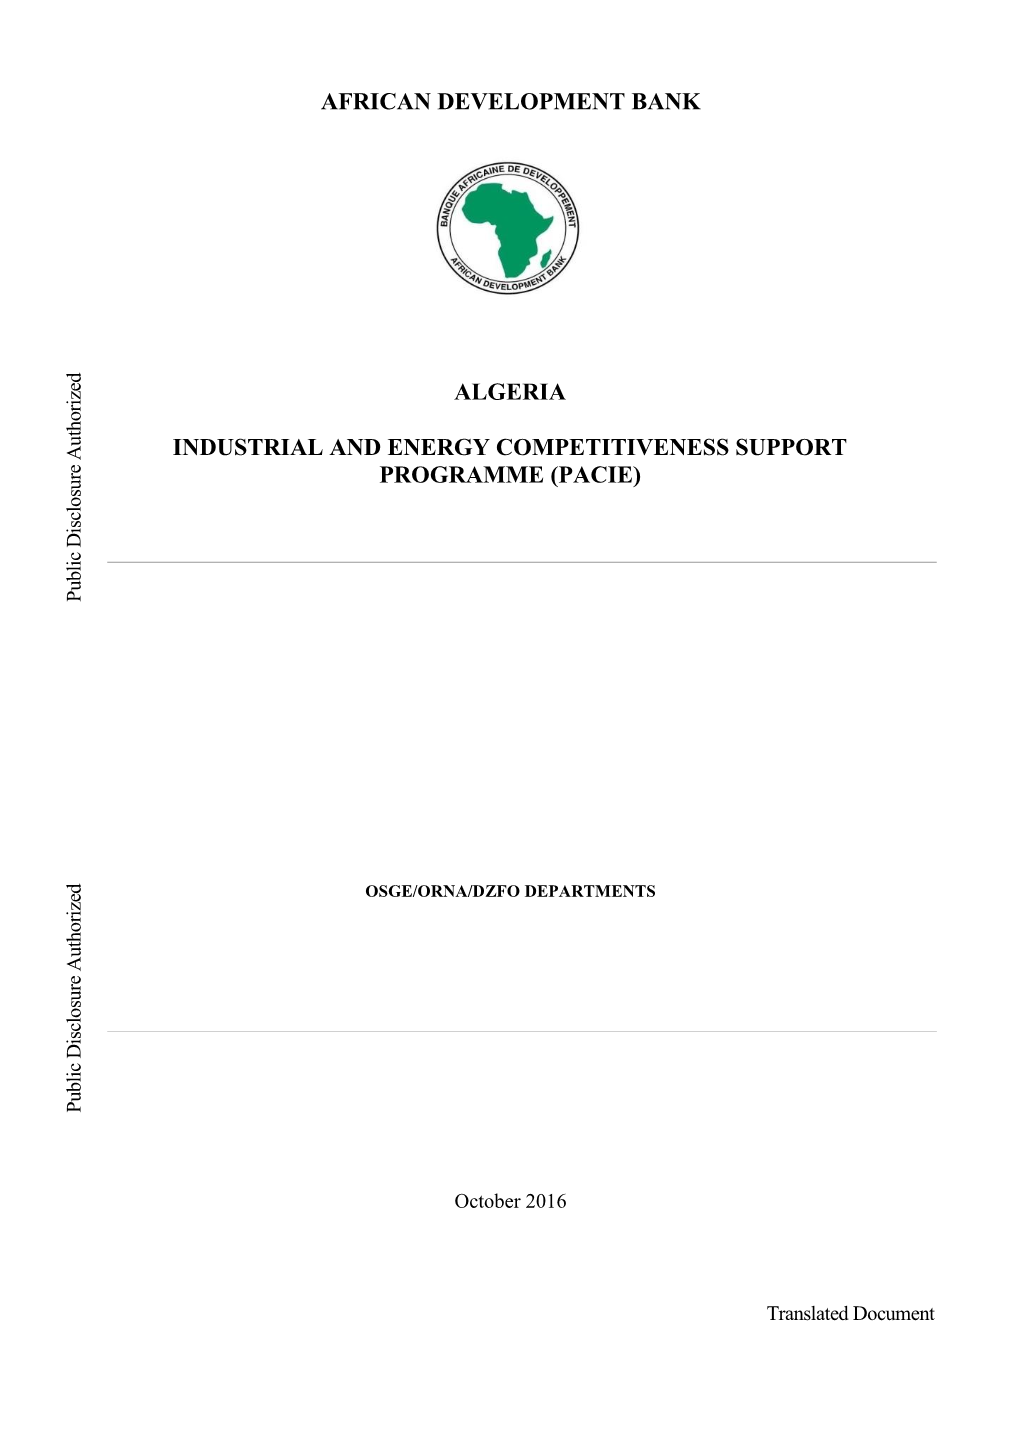 African Development Bank Algeria Industrial and Energy